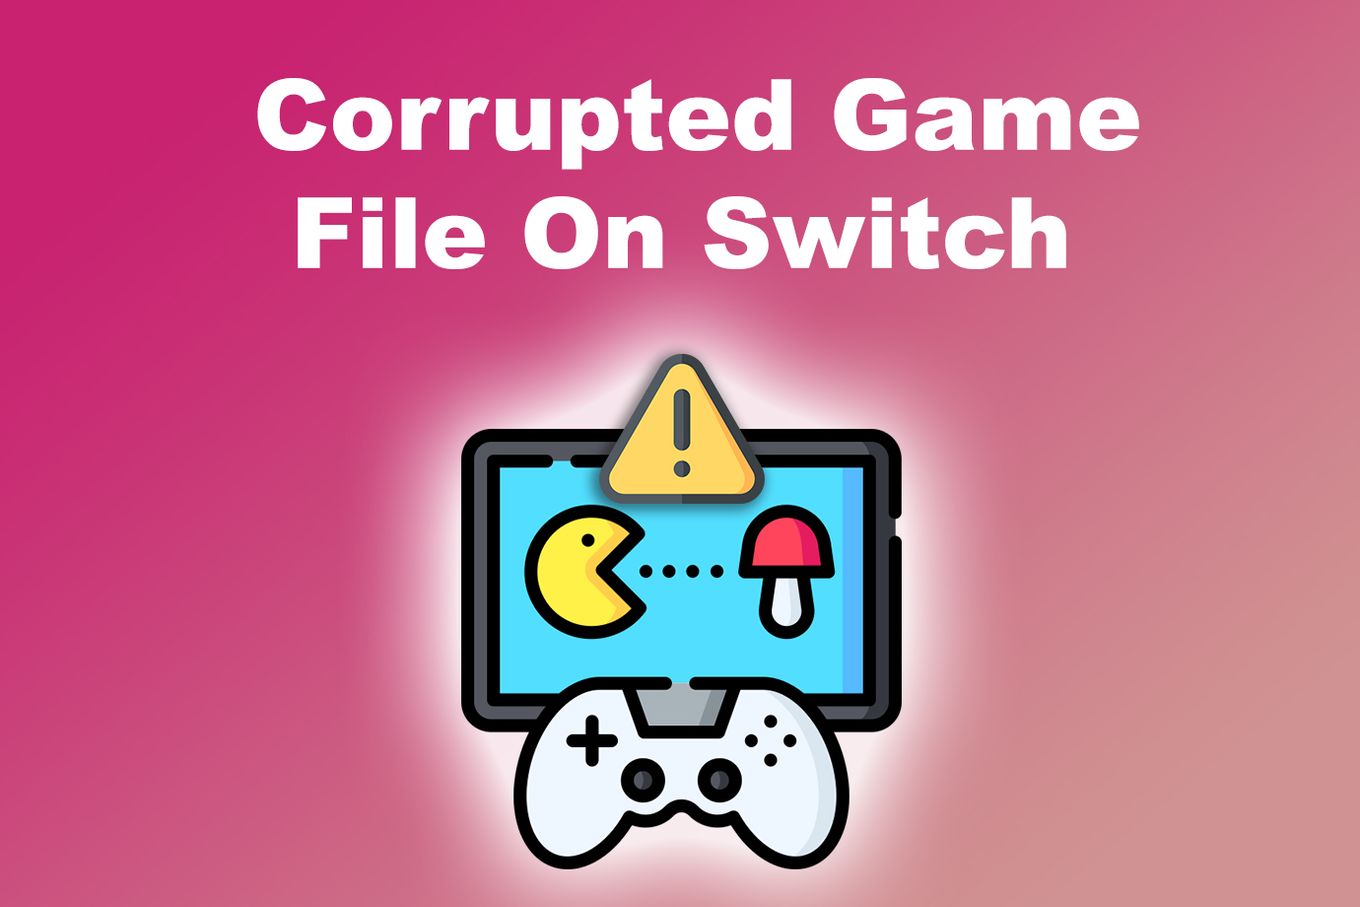 Corrupted Game File on Switch